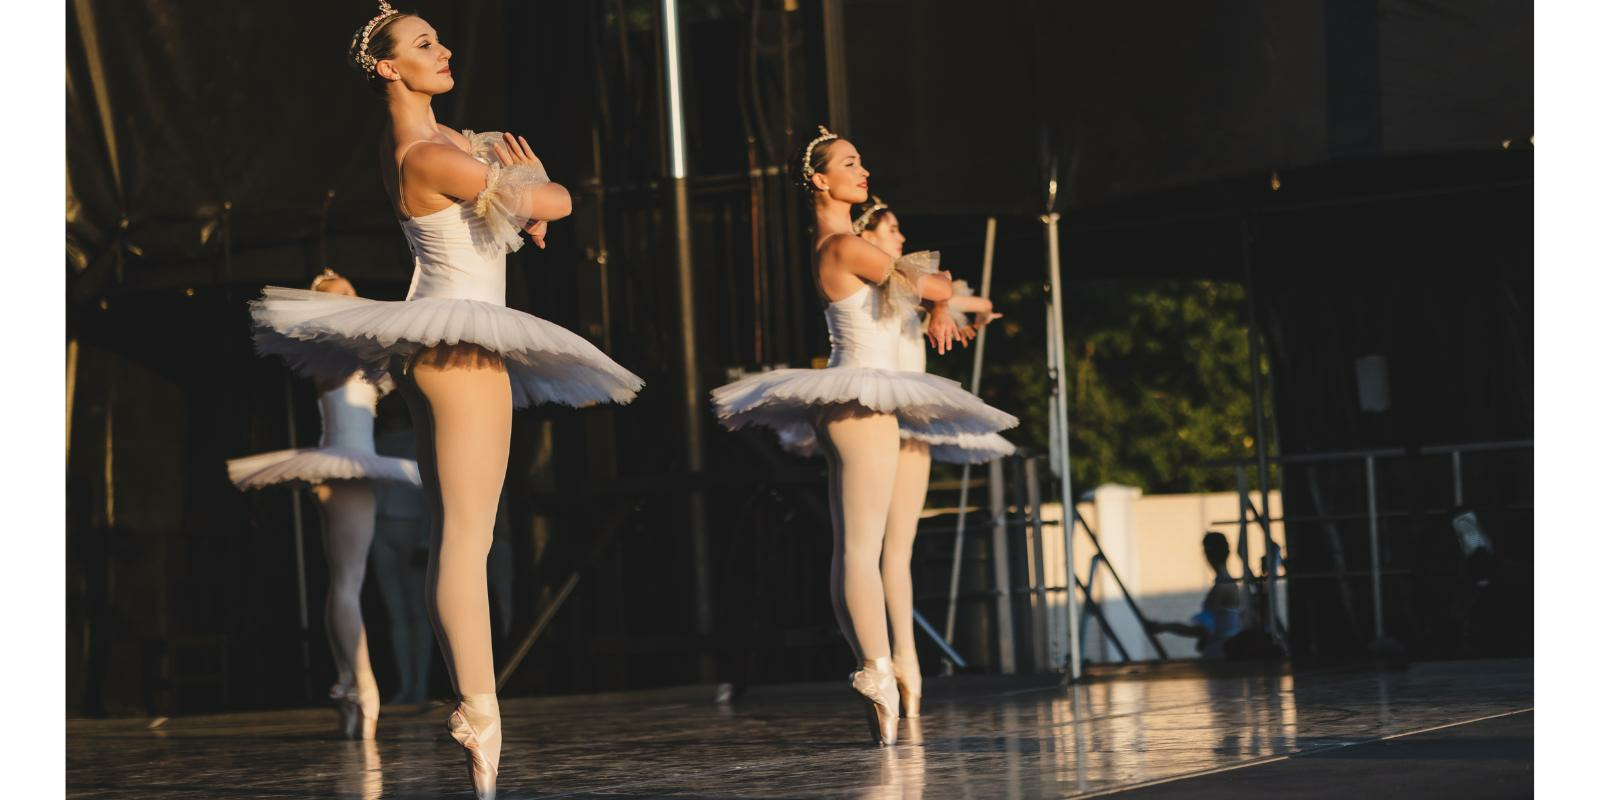 Members of First State Ballet perform on stage in white tutus and small crowns.